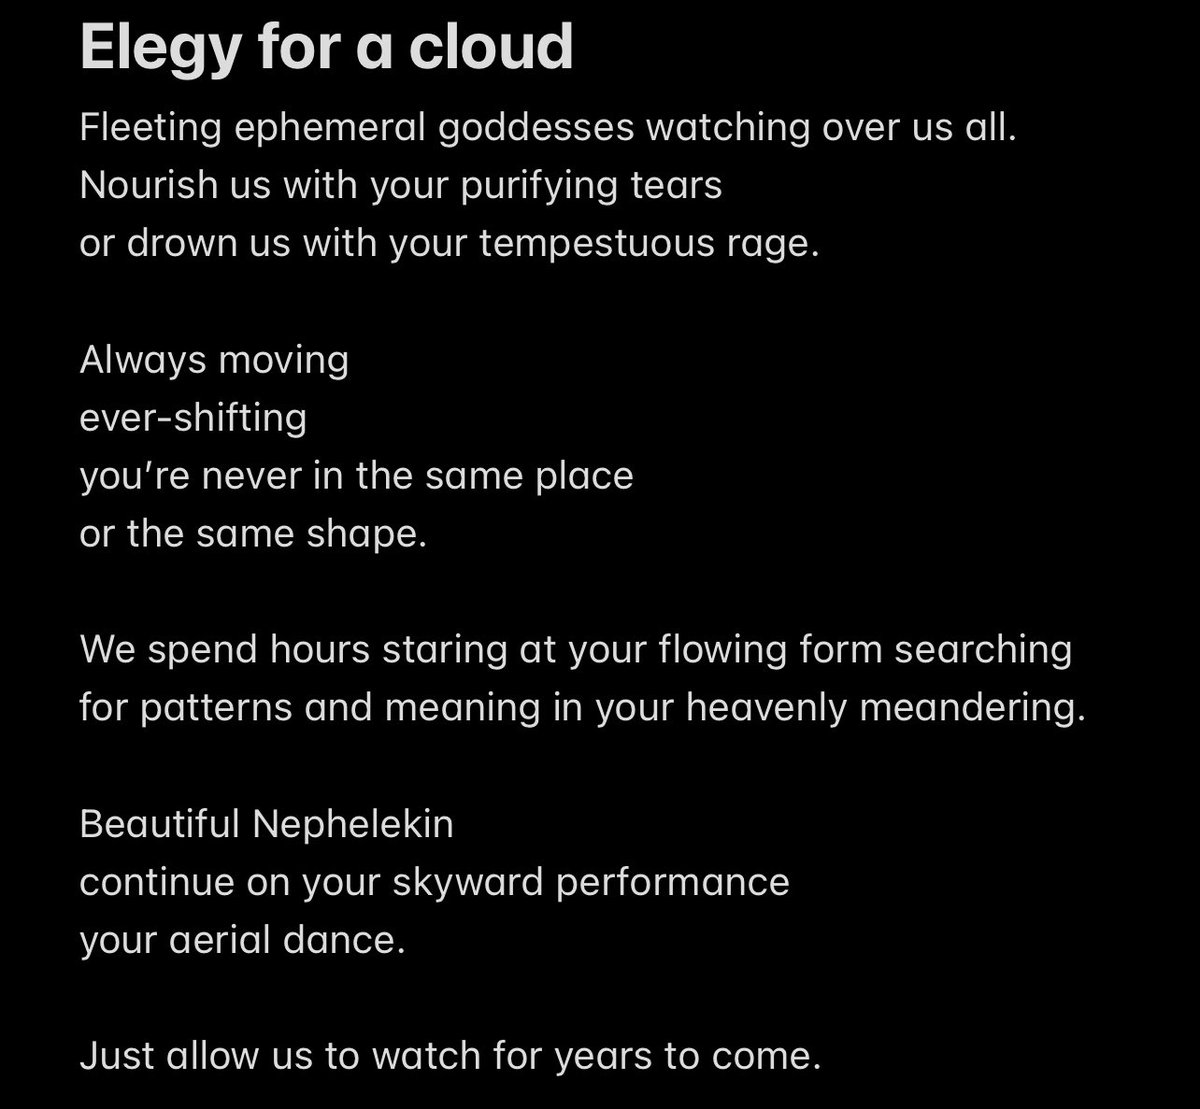 Nice little summer poem I wrote a while back, hope you get some inspo from looking at the clouds too!
#poem #clouds #queerwriter